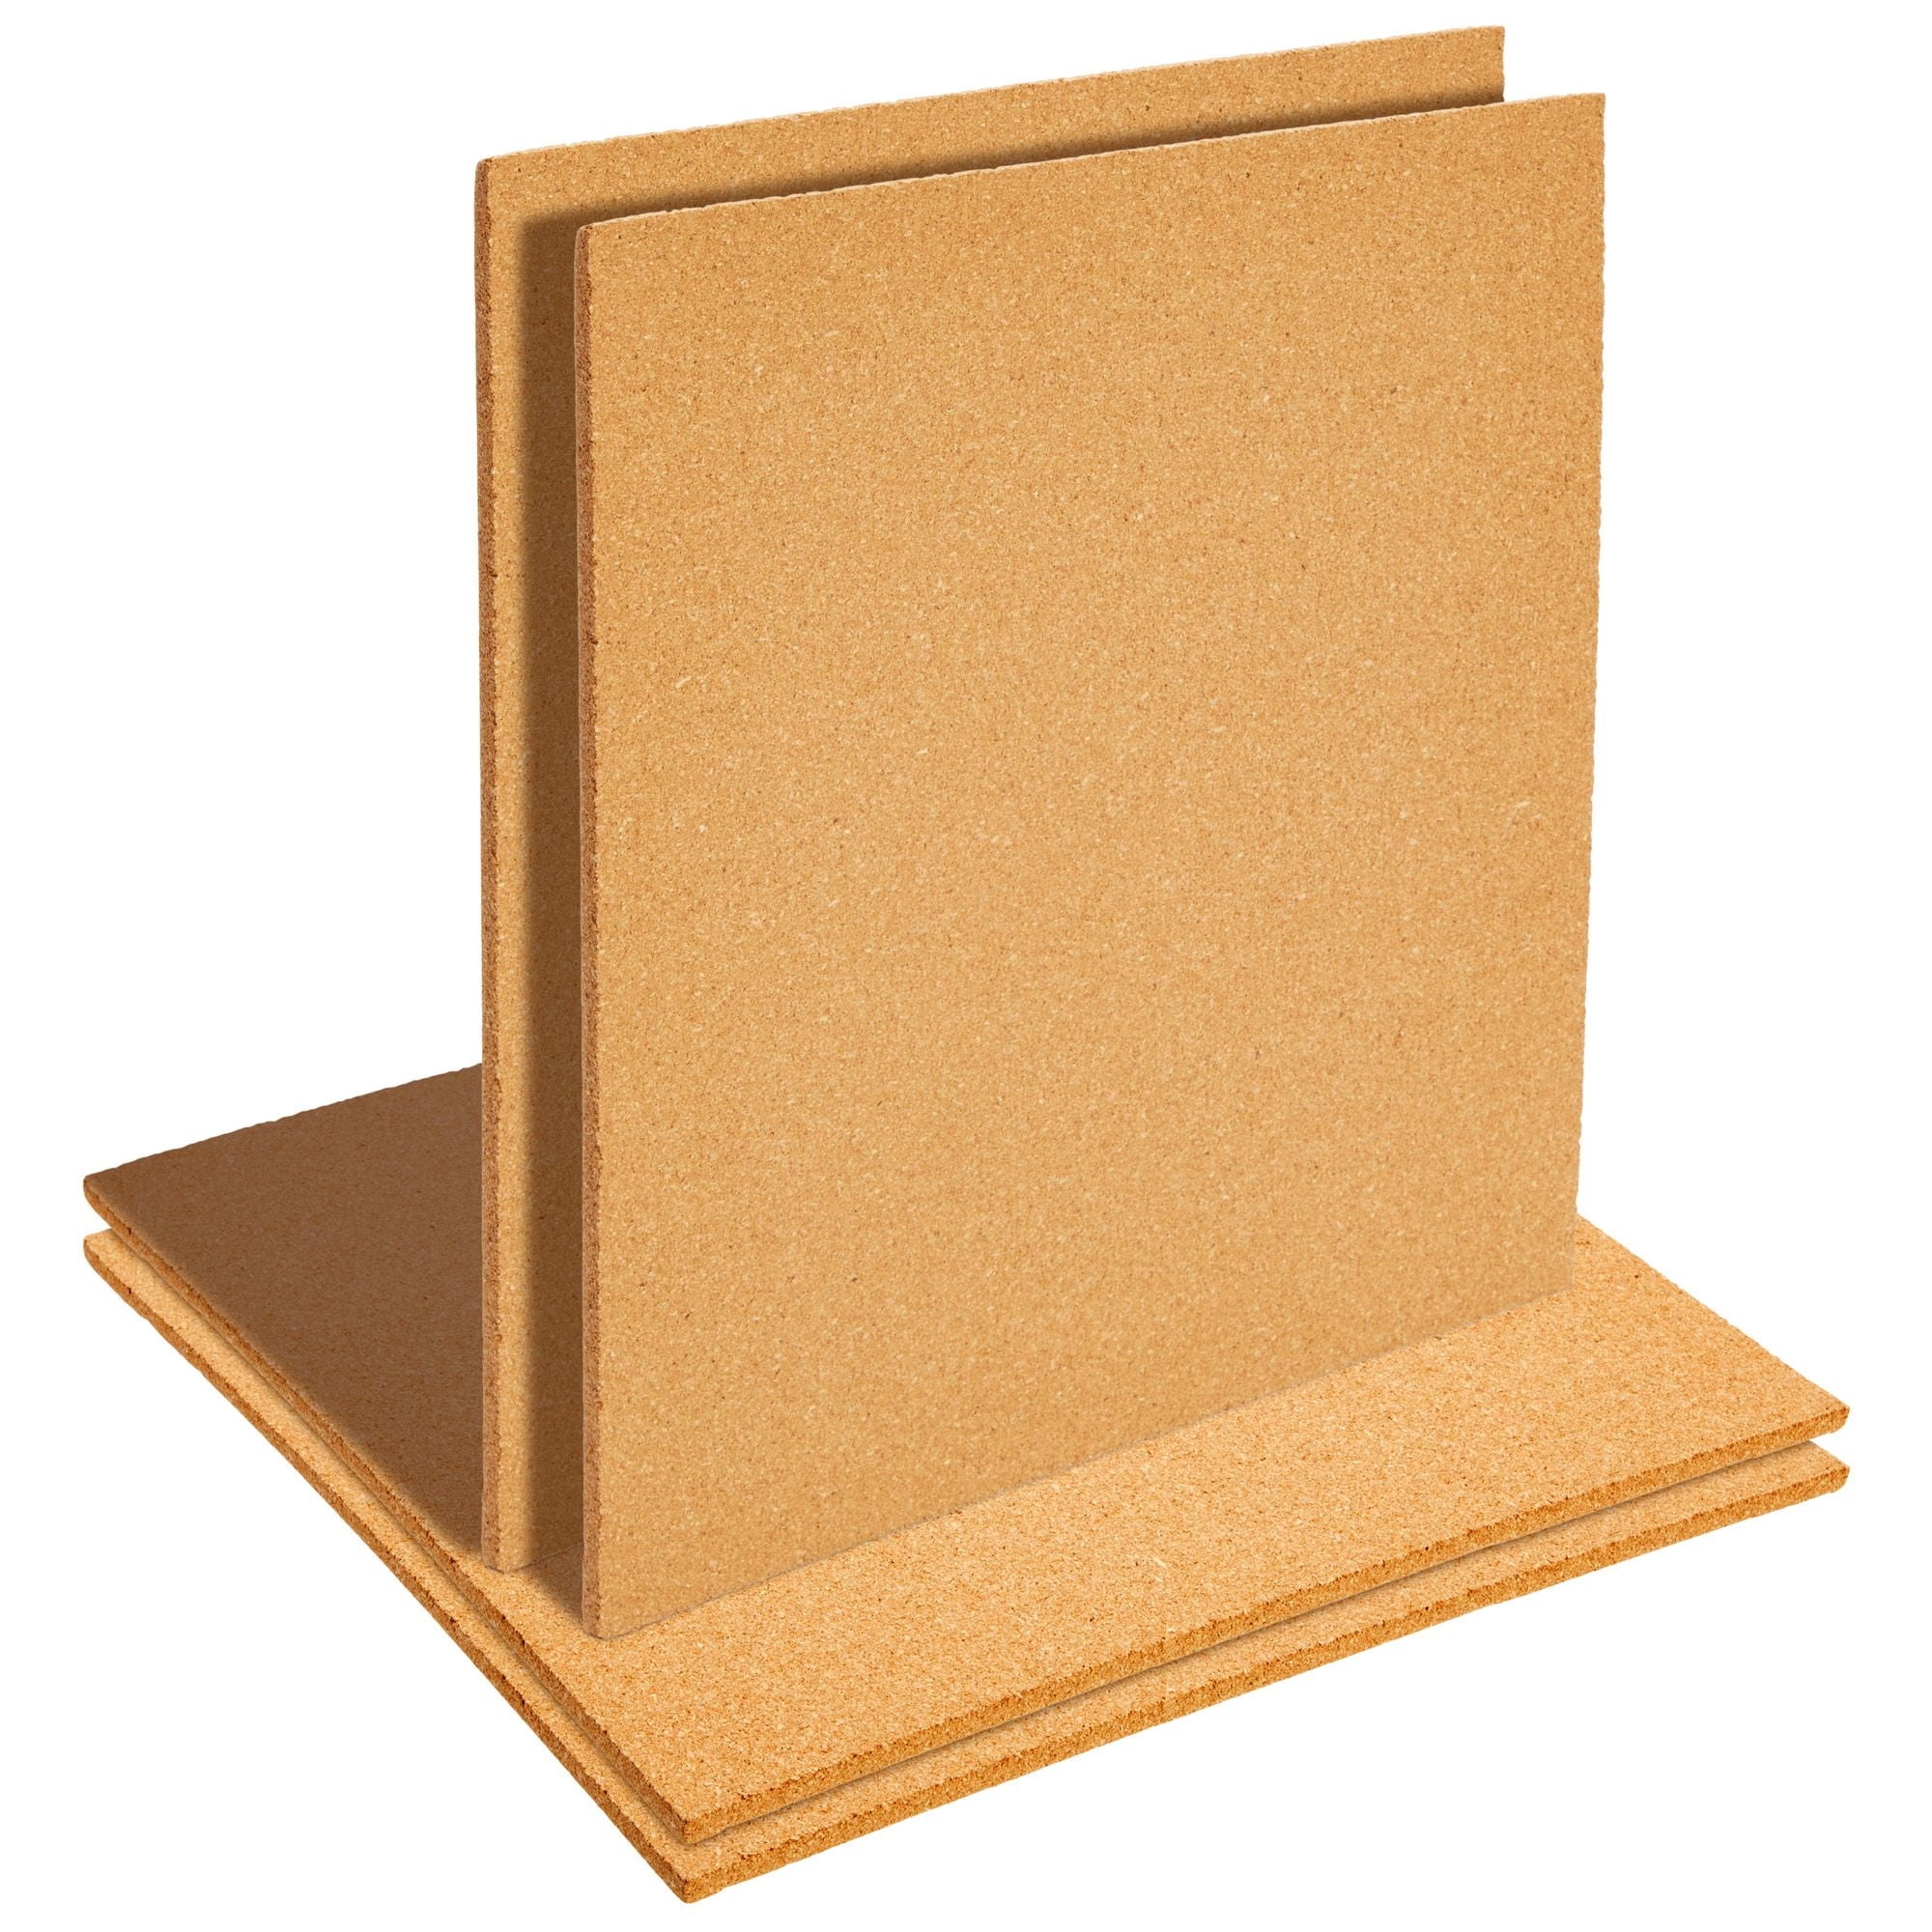 4-Pack Cork Board Tiles, 1/4-Inch Natural Square Cork Board Tiles for  Bulletin Boards, Coasters, Countertop Pot and Pan Holders, and DIY Arts and